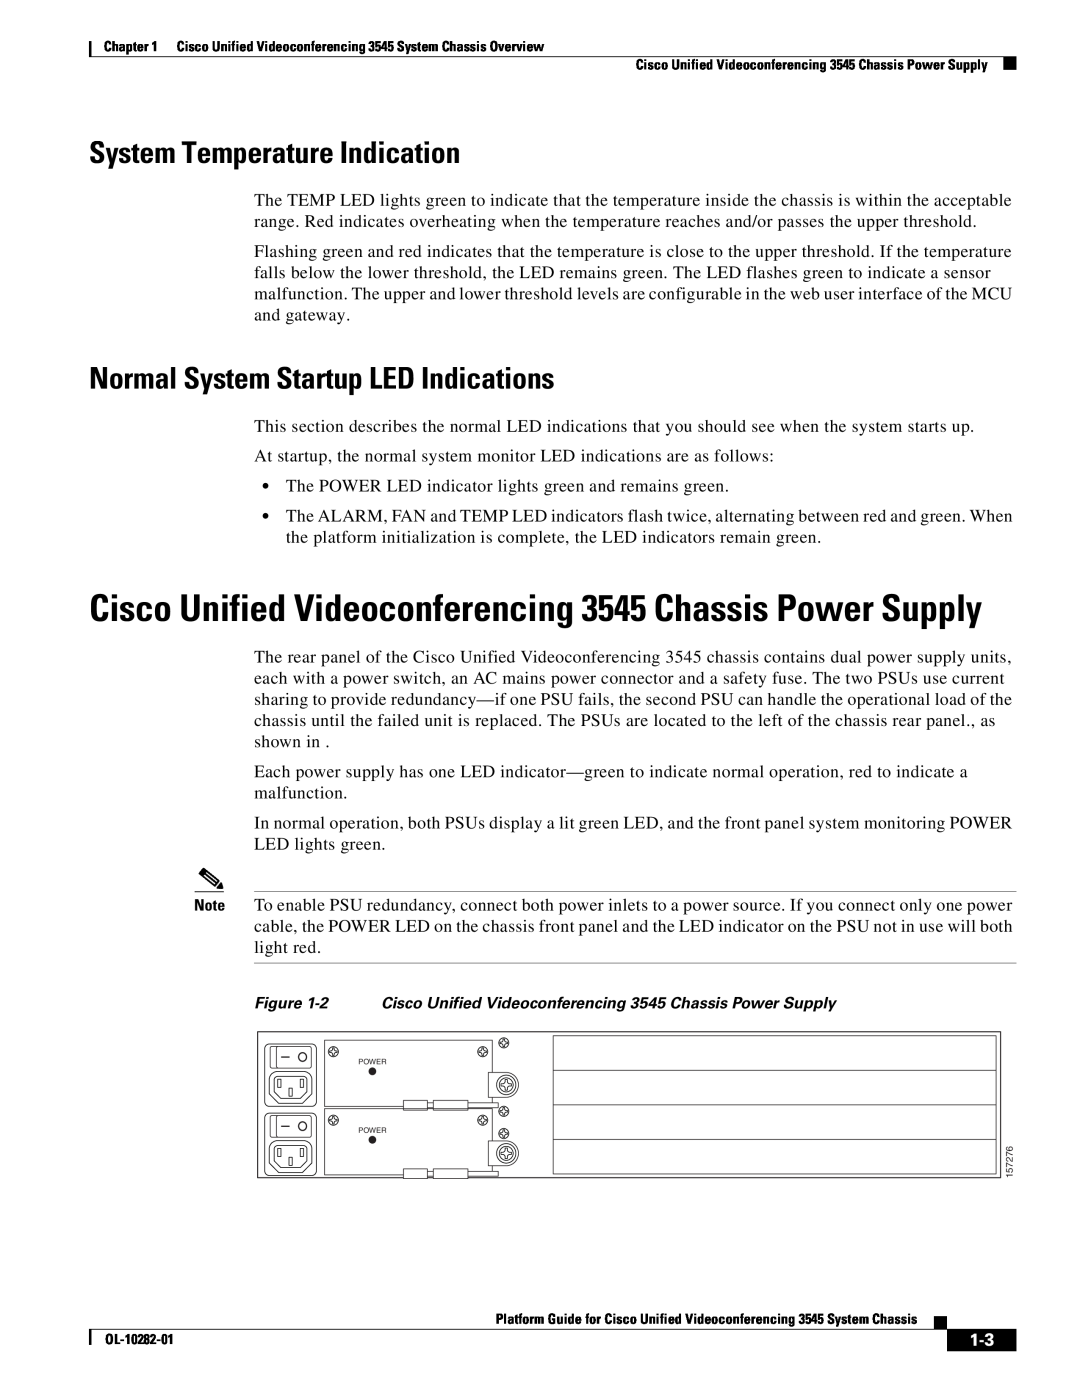 Cisco Systems OL-10282-01 manual System Temperature Indication, Normal System Startup LED Indications 